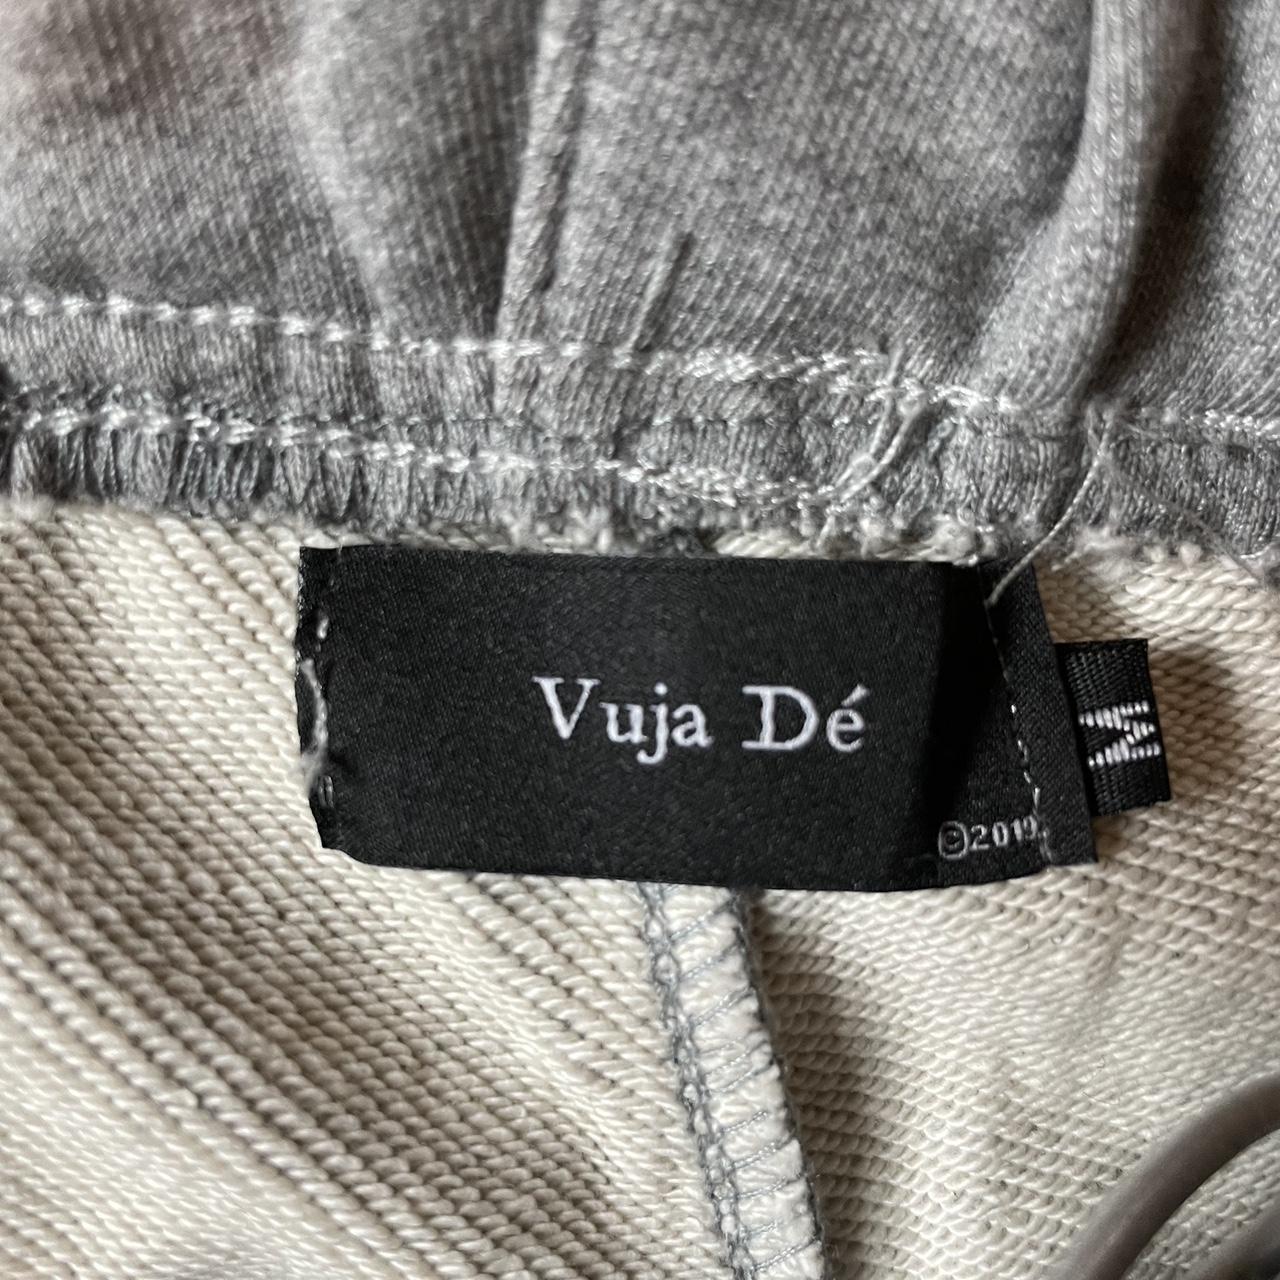 Vuja Dé Flared Sweats Price very much negotiable - Depop